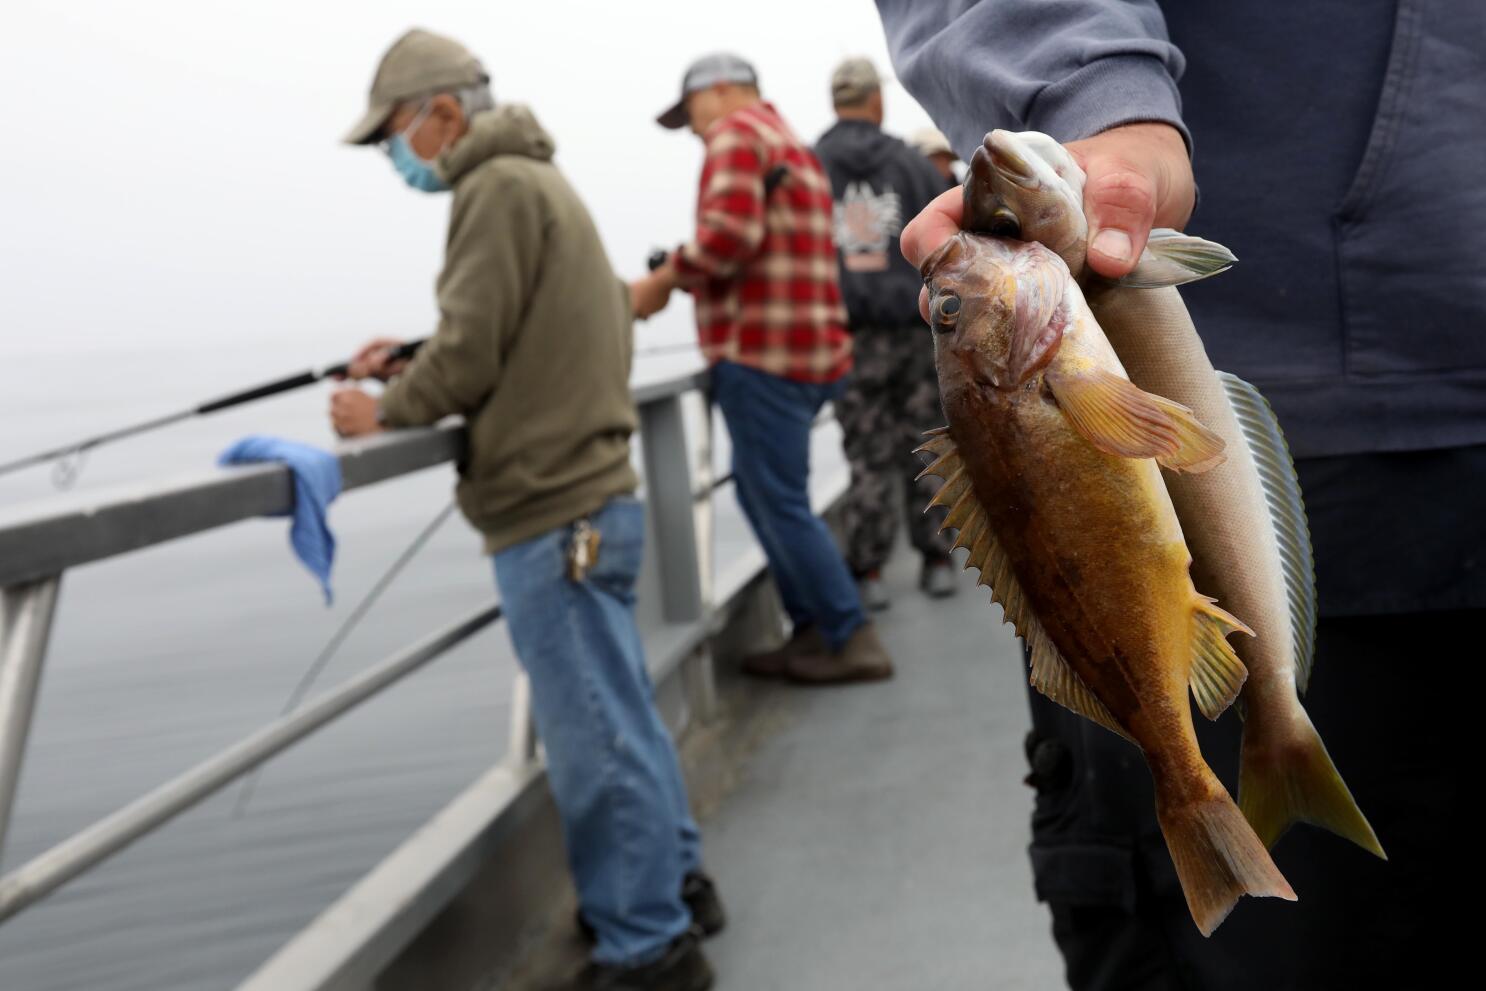 Will California emission rules sink sportfishing businesses? - Los